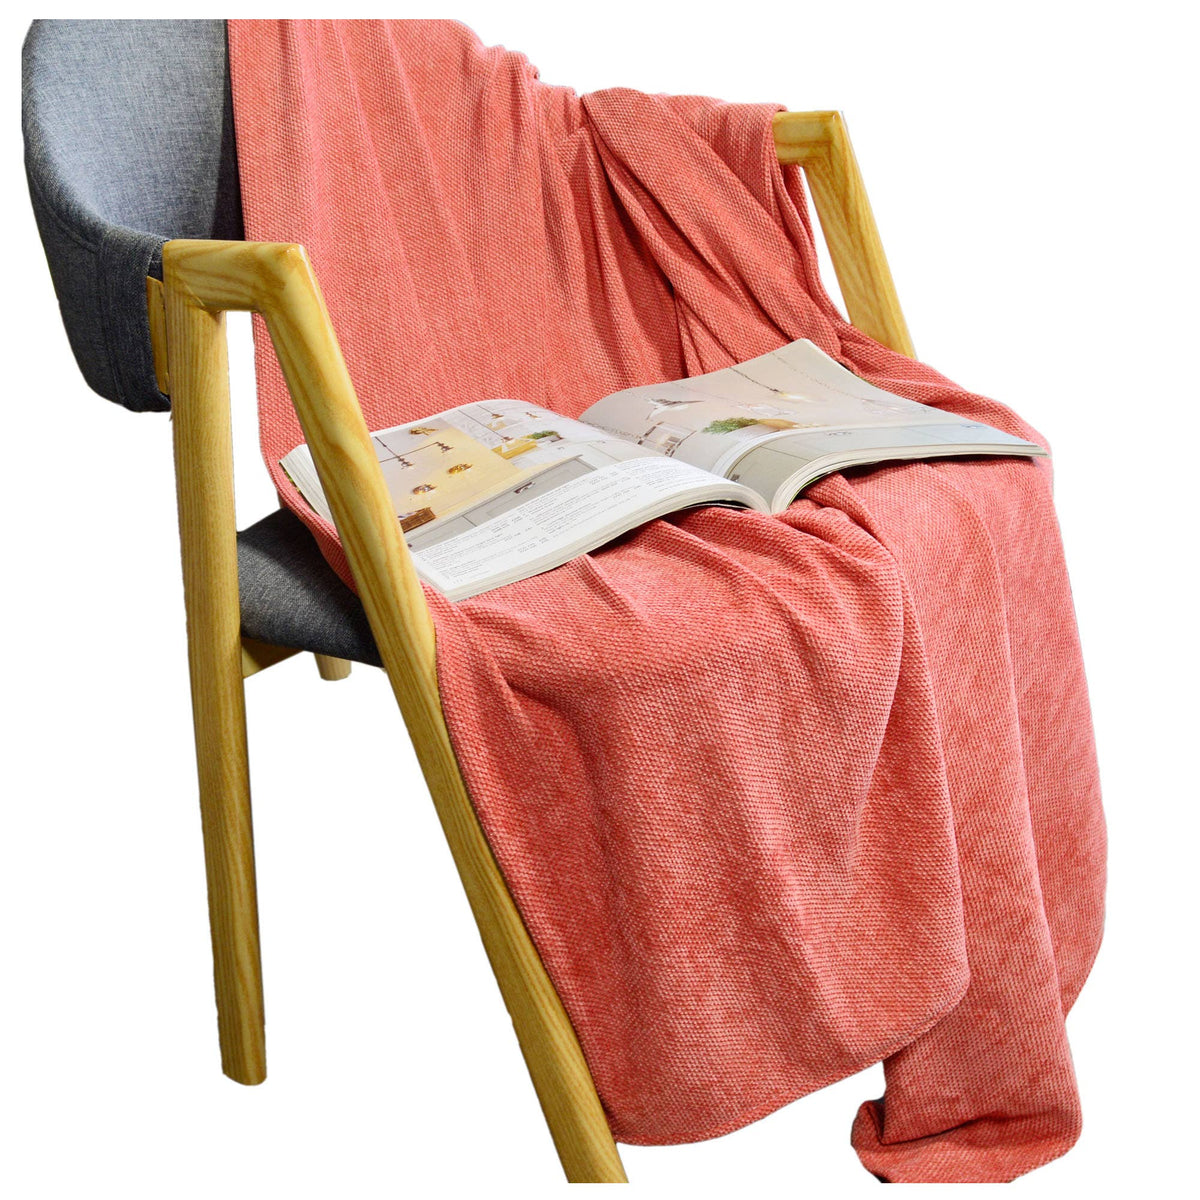 Knitted Microfiber Throw Blanket Plush Soft: Large-60x80 / Yellow